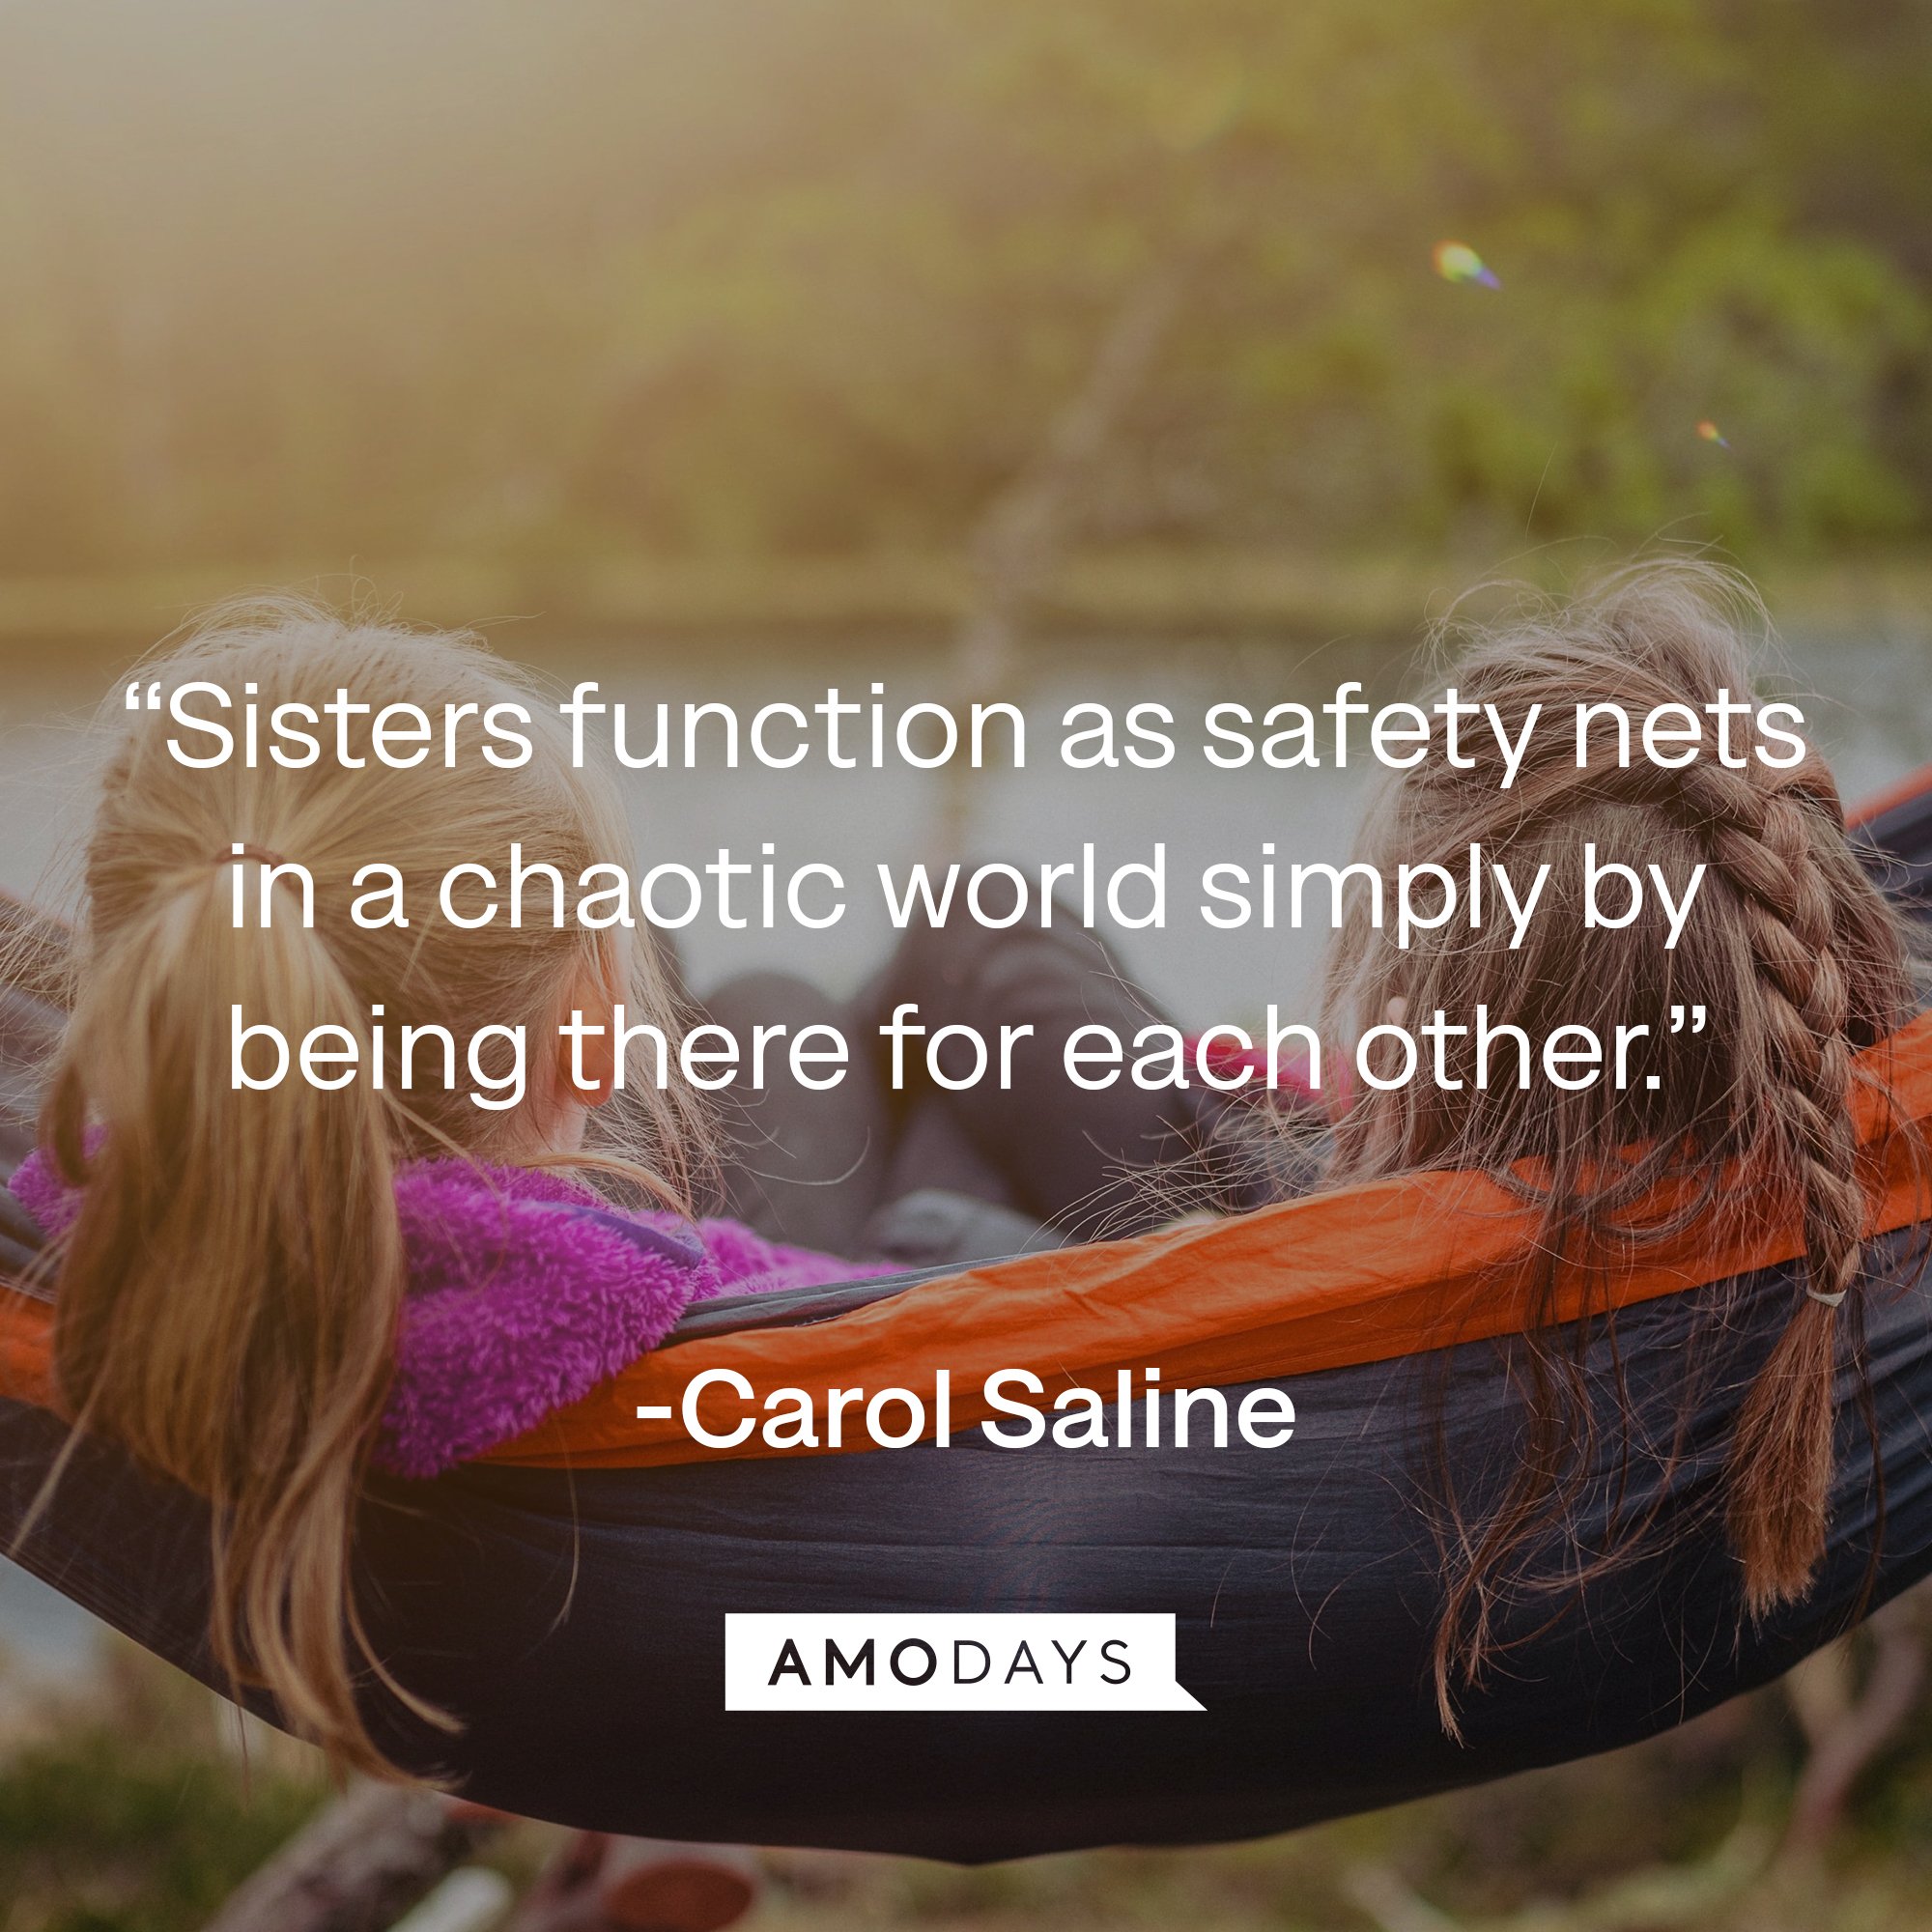  Carol Saline's quote: “Sisters function as safety nets in a chaotic world simply by being there for each other.” | Image: AmoDays